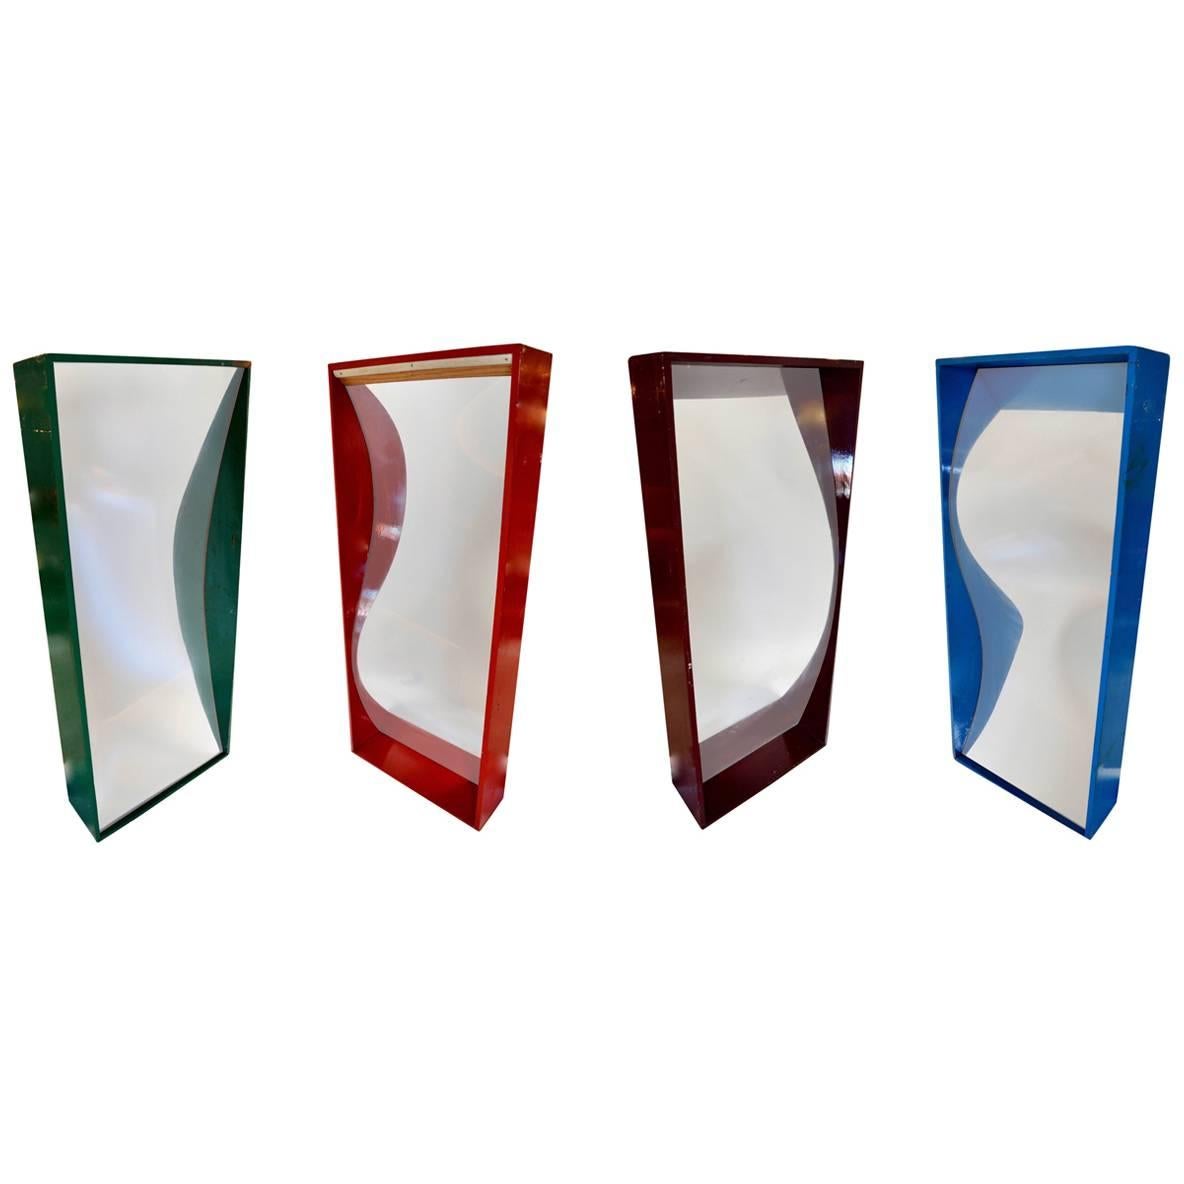 Set of Four Vintage Carnival Fun-House Mirrors